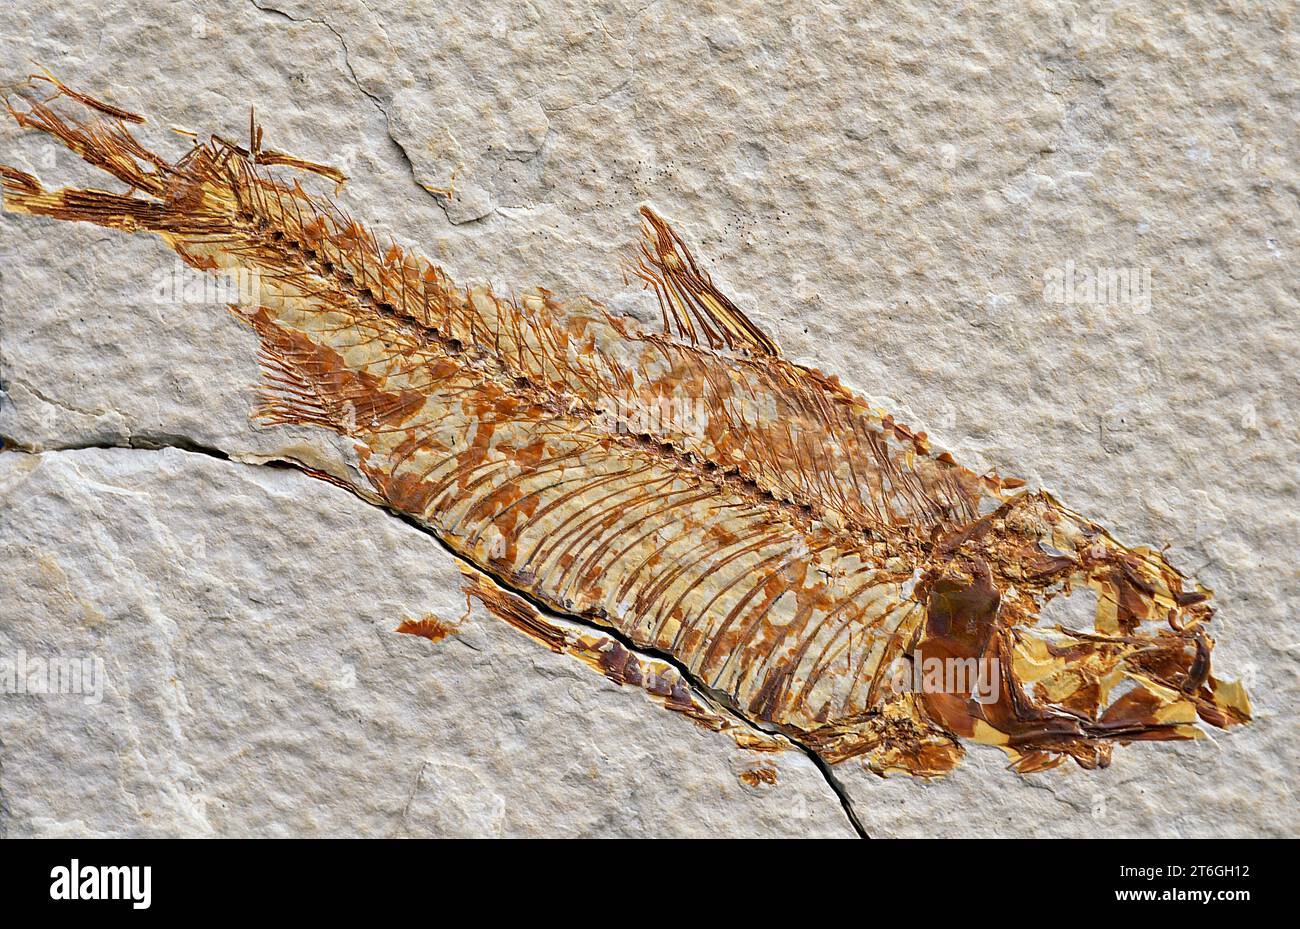 Fossil freshwater fish (Knightia sp.) that lived in Eocene. Sample. Stock Photo